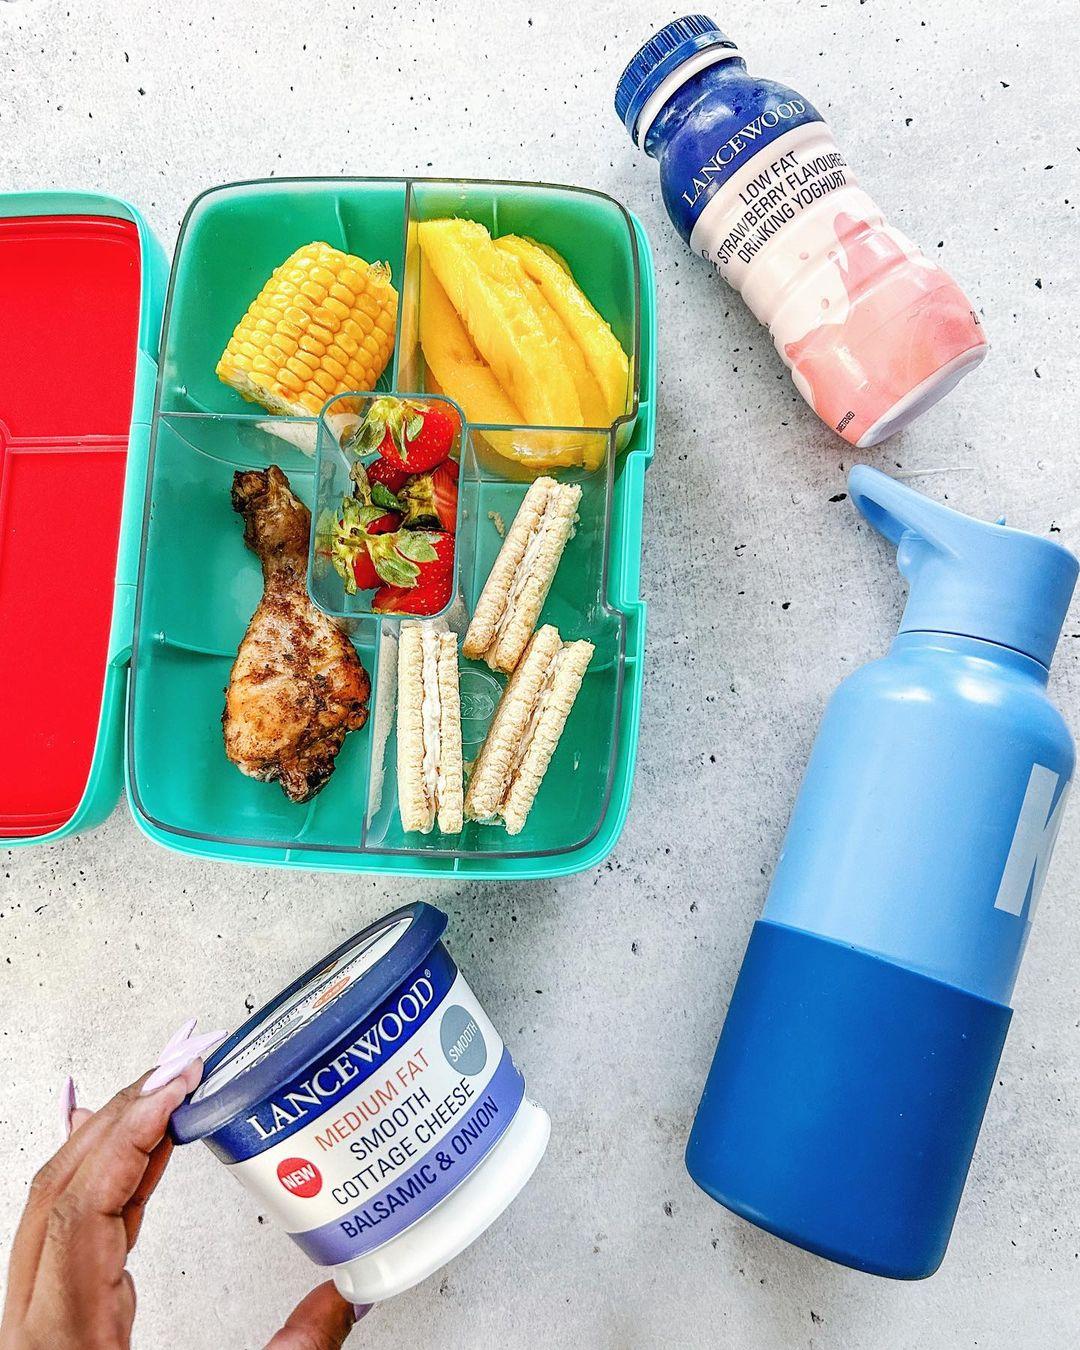 class="content__text"
 Balanced Lunchbox Ideas for the week ahead💡 

The key to a balanced lunchbox is variety and colour. I always make sure to add fruit, vegetables, protein, grain and dairy. I’ve partnered with @lancewood.co.za and @mycrunchbox to make sure all my boy’s lunchboxes are packed with goodness. Lancewood has a variety of great dairy products that you can easily incorporate into your kids lunchboxes without any work at all. 

Lunchbox 1:
Wheat Toast cracker bread with @lancewood.co.za ’s yummy balsamic &amp; onion cottage cheese
Chicken drumstick 
Grilled corn
Mango
Strawberries 
Strawberry drinking yogurt also from Lancewood 
Water

Lunchbox 2:
Ham &amp; cheese croissant using Grated Gouda from Lancewood
Beet Salad
Grapes
Popcorn
The delicious Double Cream Mixed Berry yogurt from @lancewood.co.za 
Water 

Lunchbox 3:
Ham &amp; Cheese Rolls using Lancewood Cheese Slices 
Crackers 
Strawberries and blueberries 
Carrots and cucumbers with 
Hummus for a dip
@lancewood.co.za Coco-pine drinking yogurt 

Save this post for future reference and share these awesome lunch ideas with your friends! 🙌🏾
 #LANCEWOODLunchbox
 #Backtoschool
 #LANCEWOODQualityTime

(Tags in each frame: @lancewood.co.za@mycrunchbox ) 
 